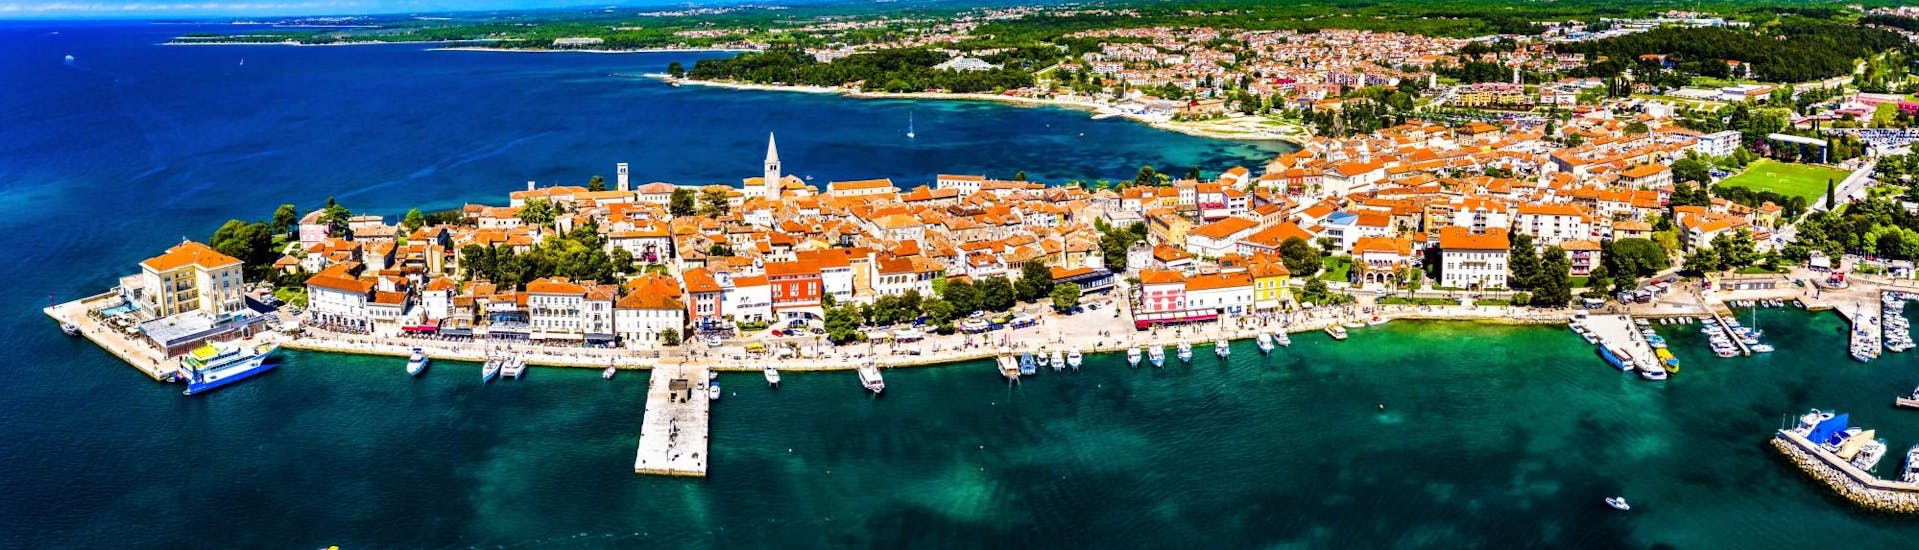 An aerial view of the city of Poreč, the ideal place for a boat rental to discover the Adriatic Sea.